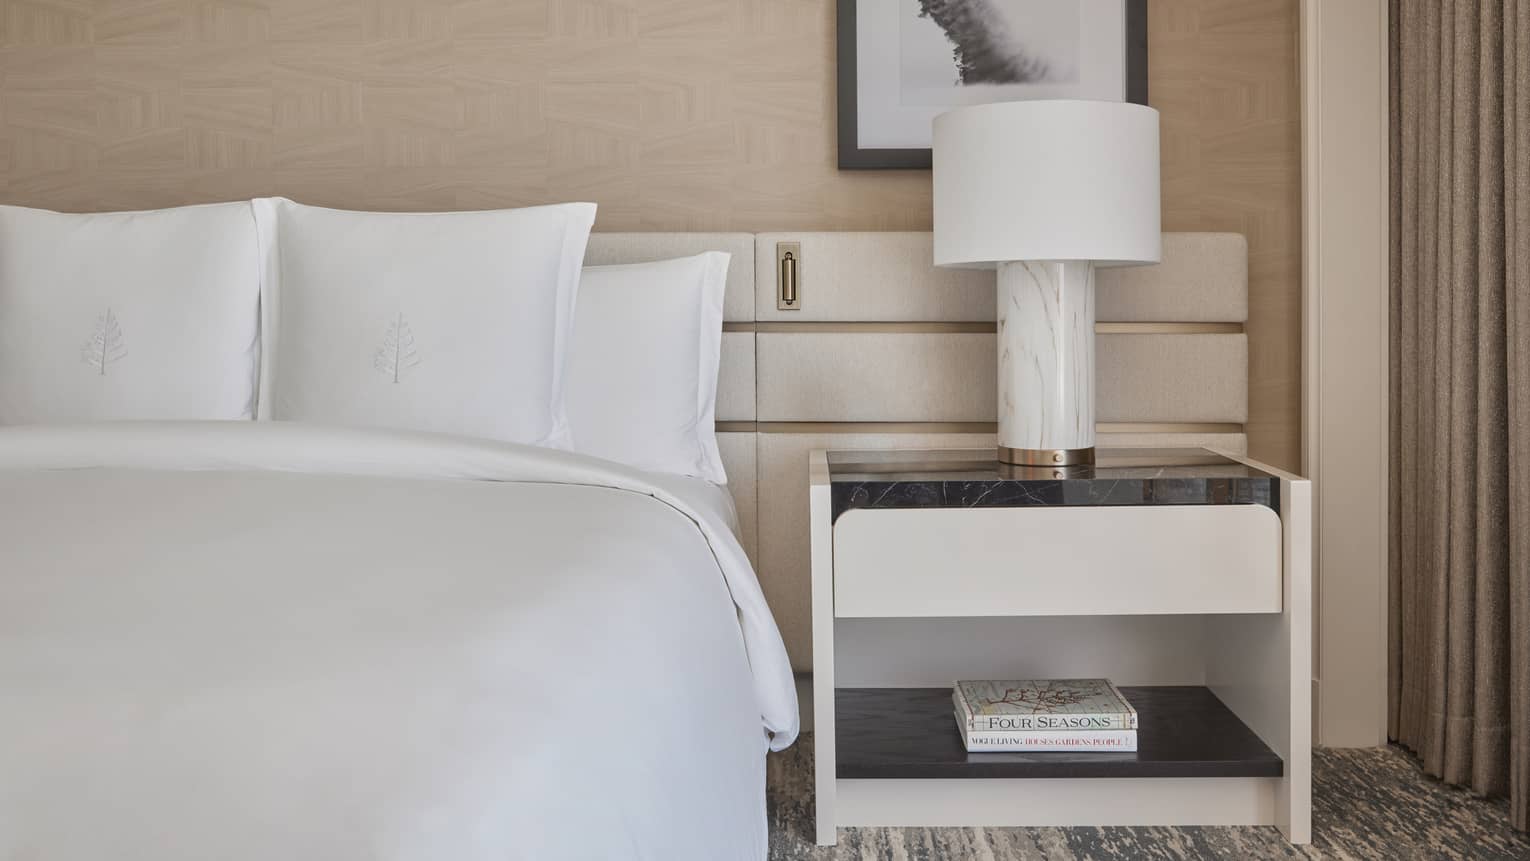 A bed in a guest room with a side table and lamp.